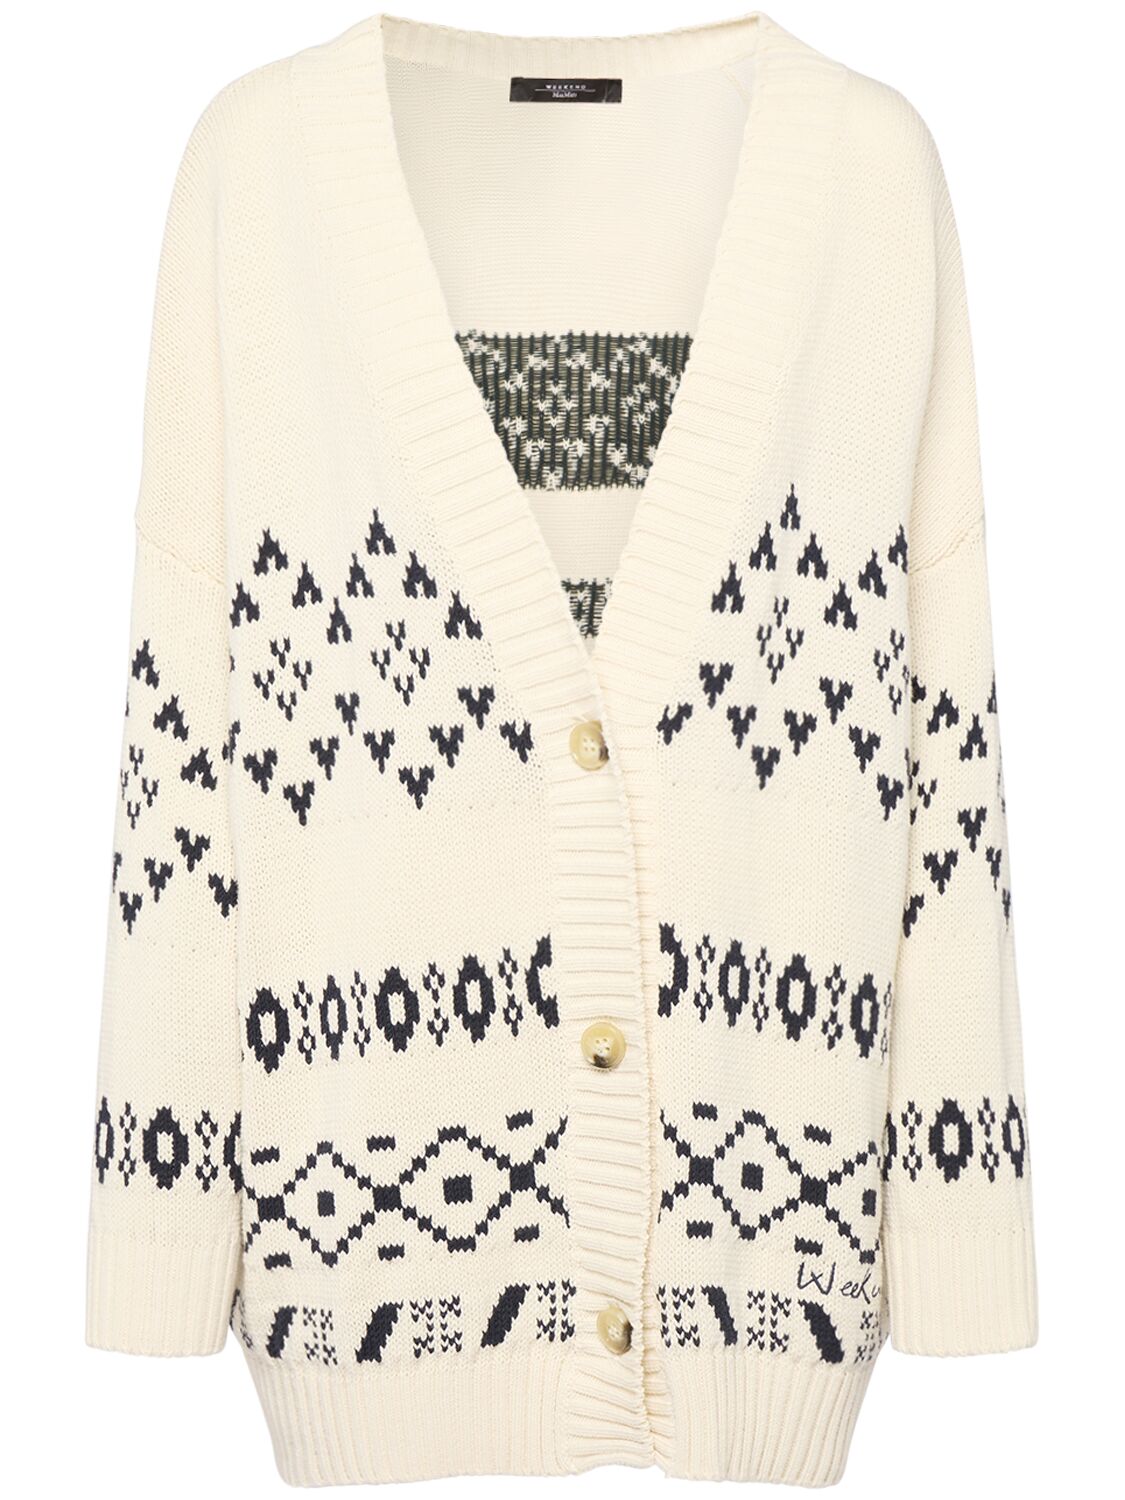 Weekend Max Mara Acacia Embroidered Cotton Blend Cardigan In White/black